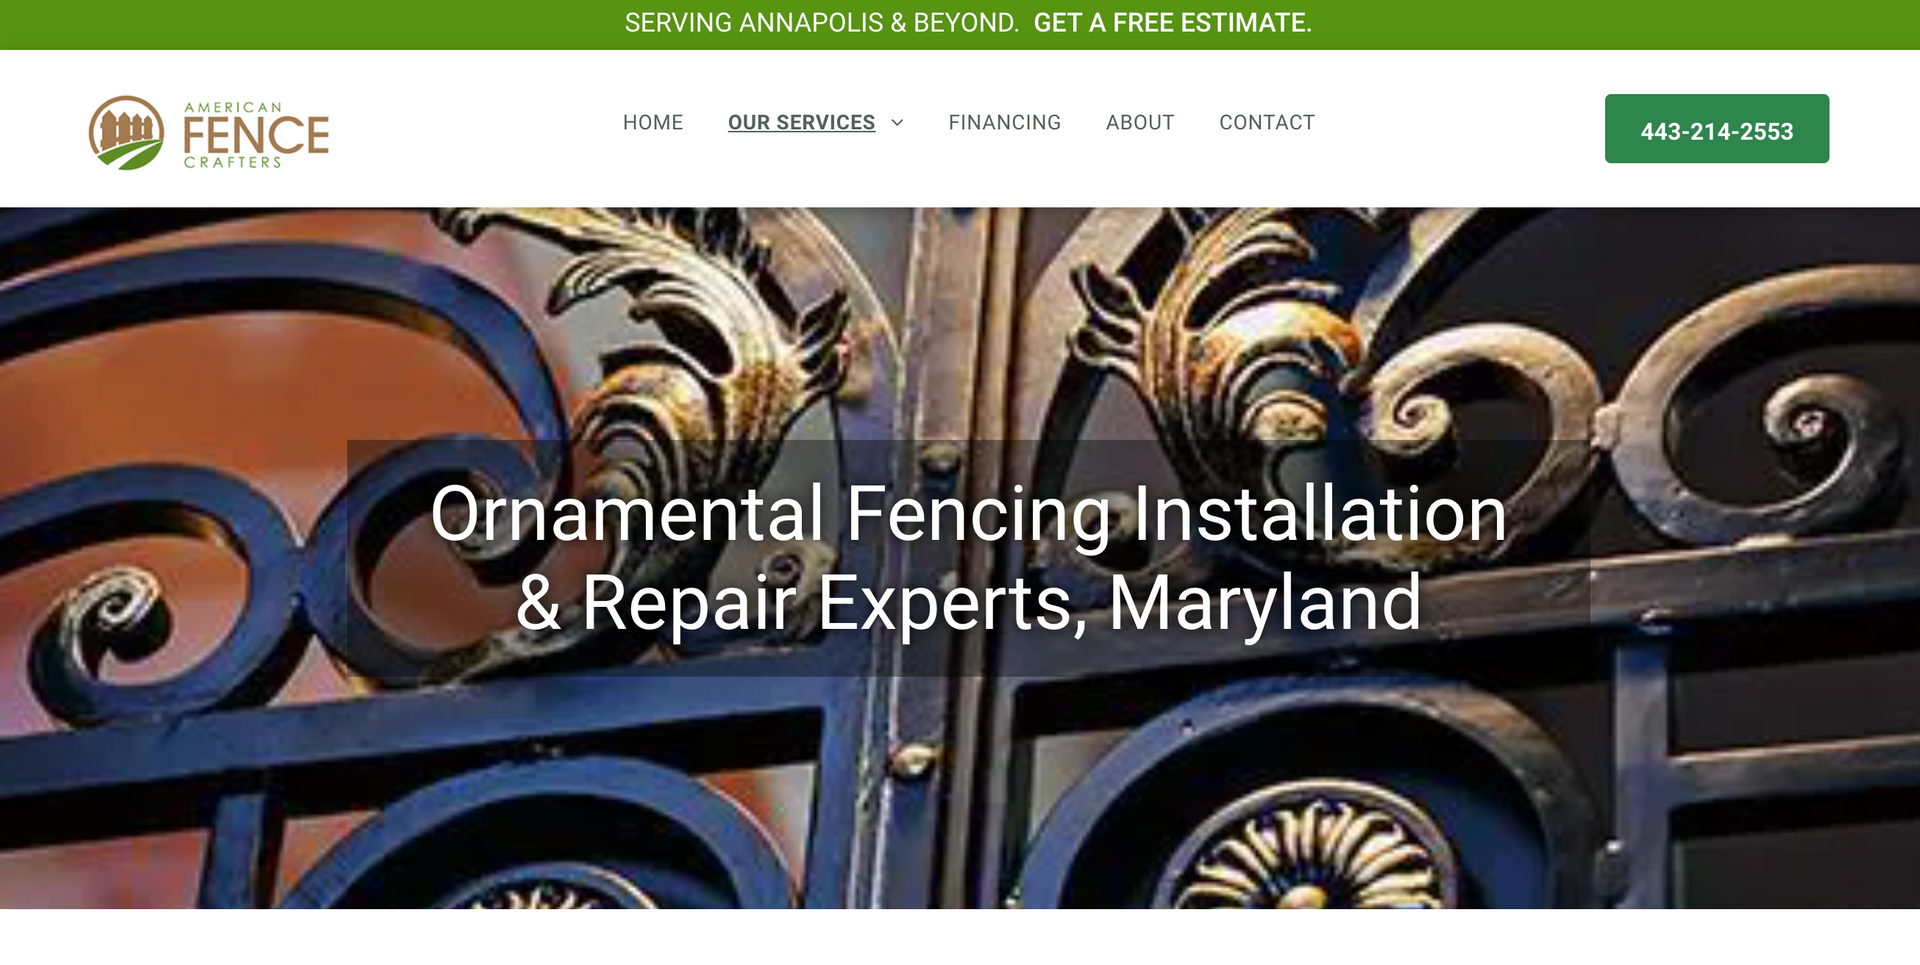 A website for ornamental fencing installation and repair experts in maryland.